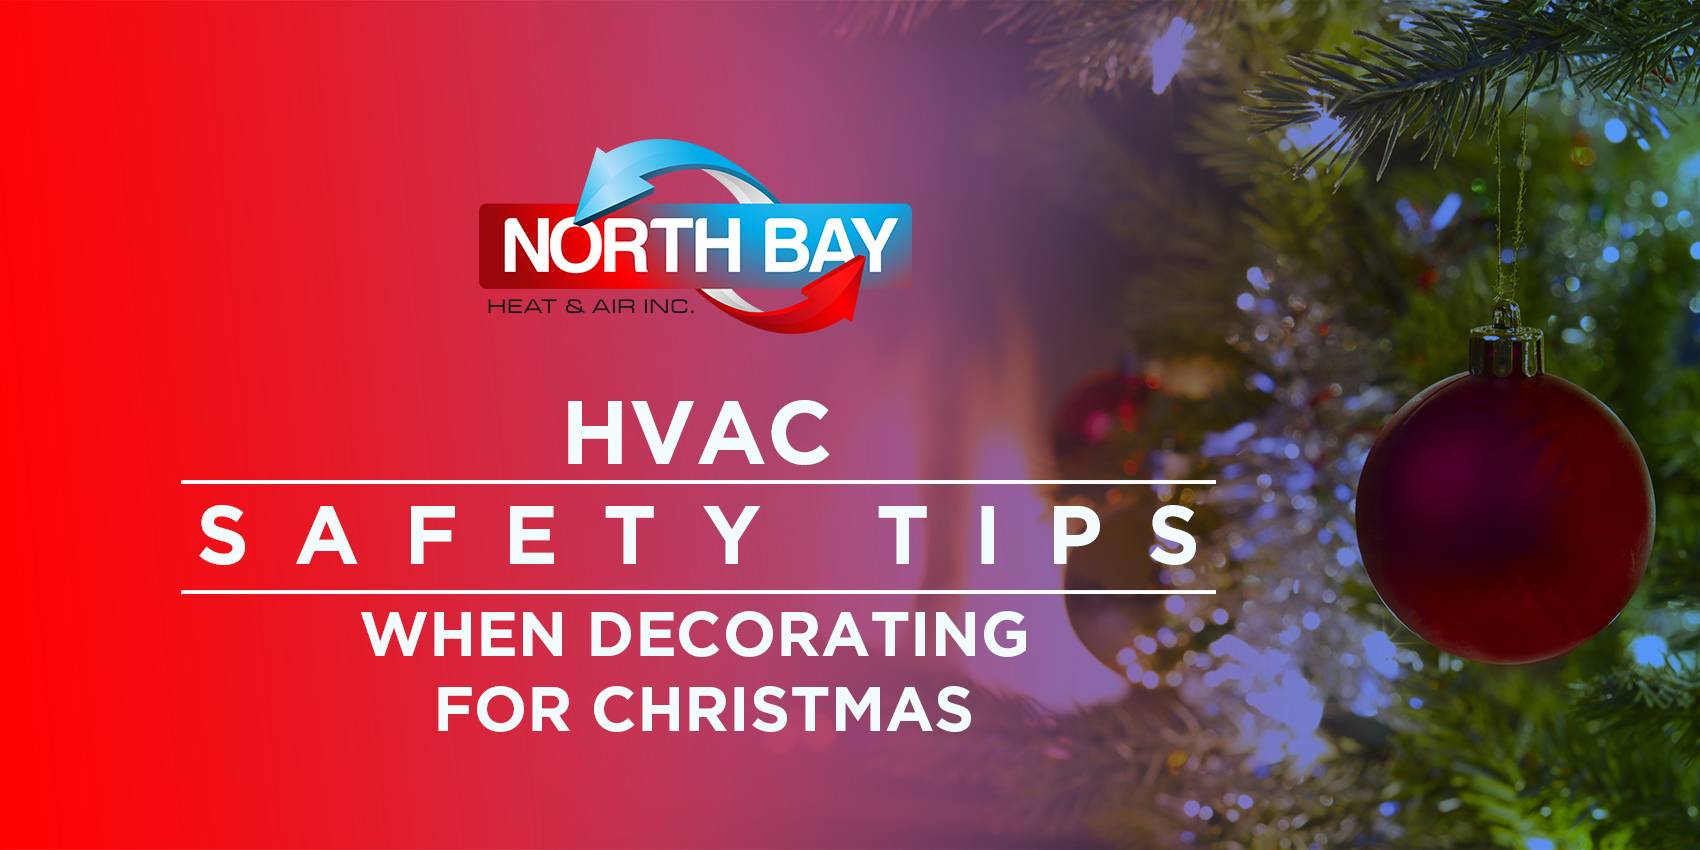 HVAC Safety Tips When Decorating for Christmas